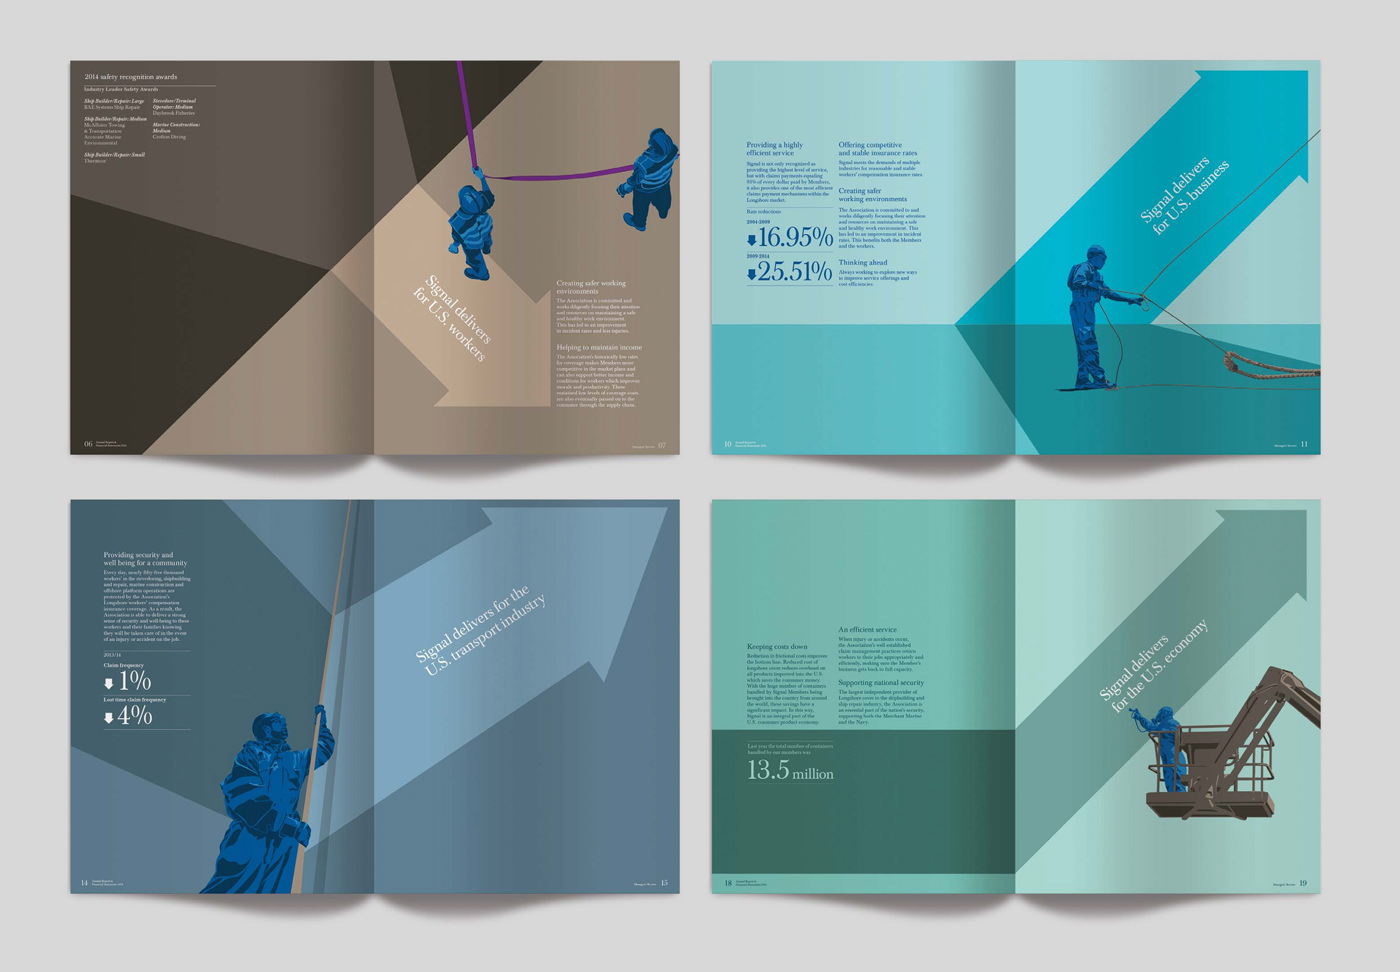 Signal Annual Report inside spreads